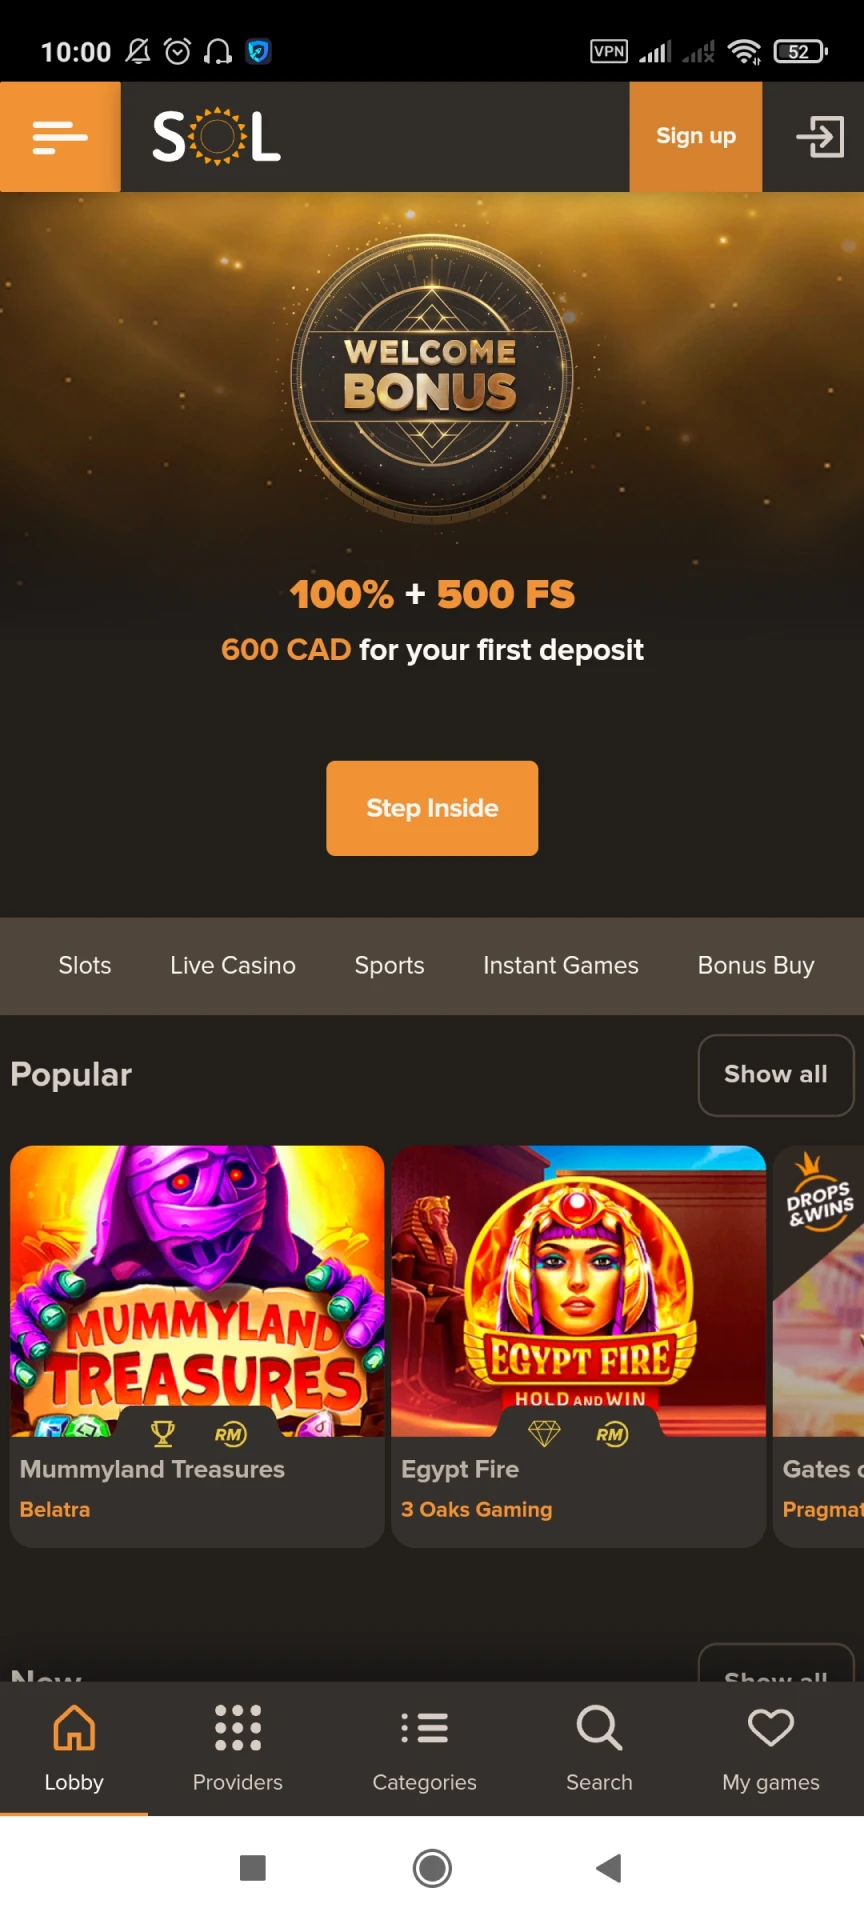 Visit the main page of the Sol Casino app.